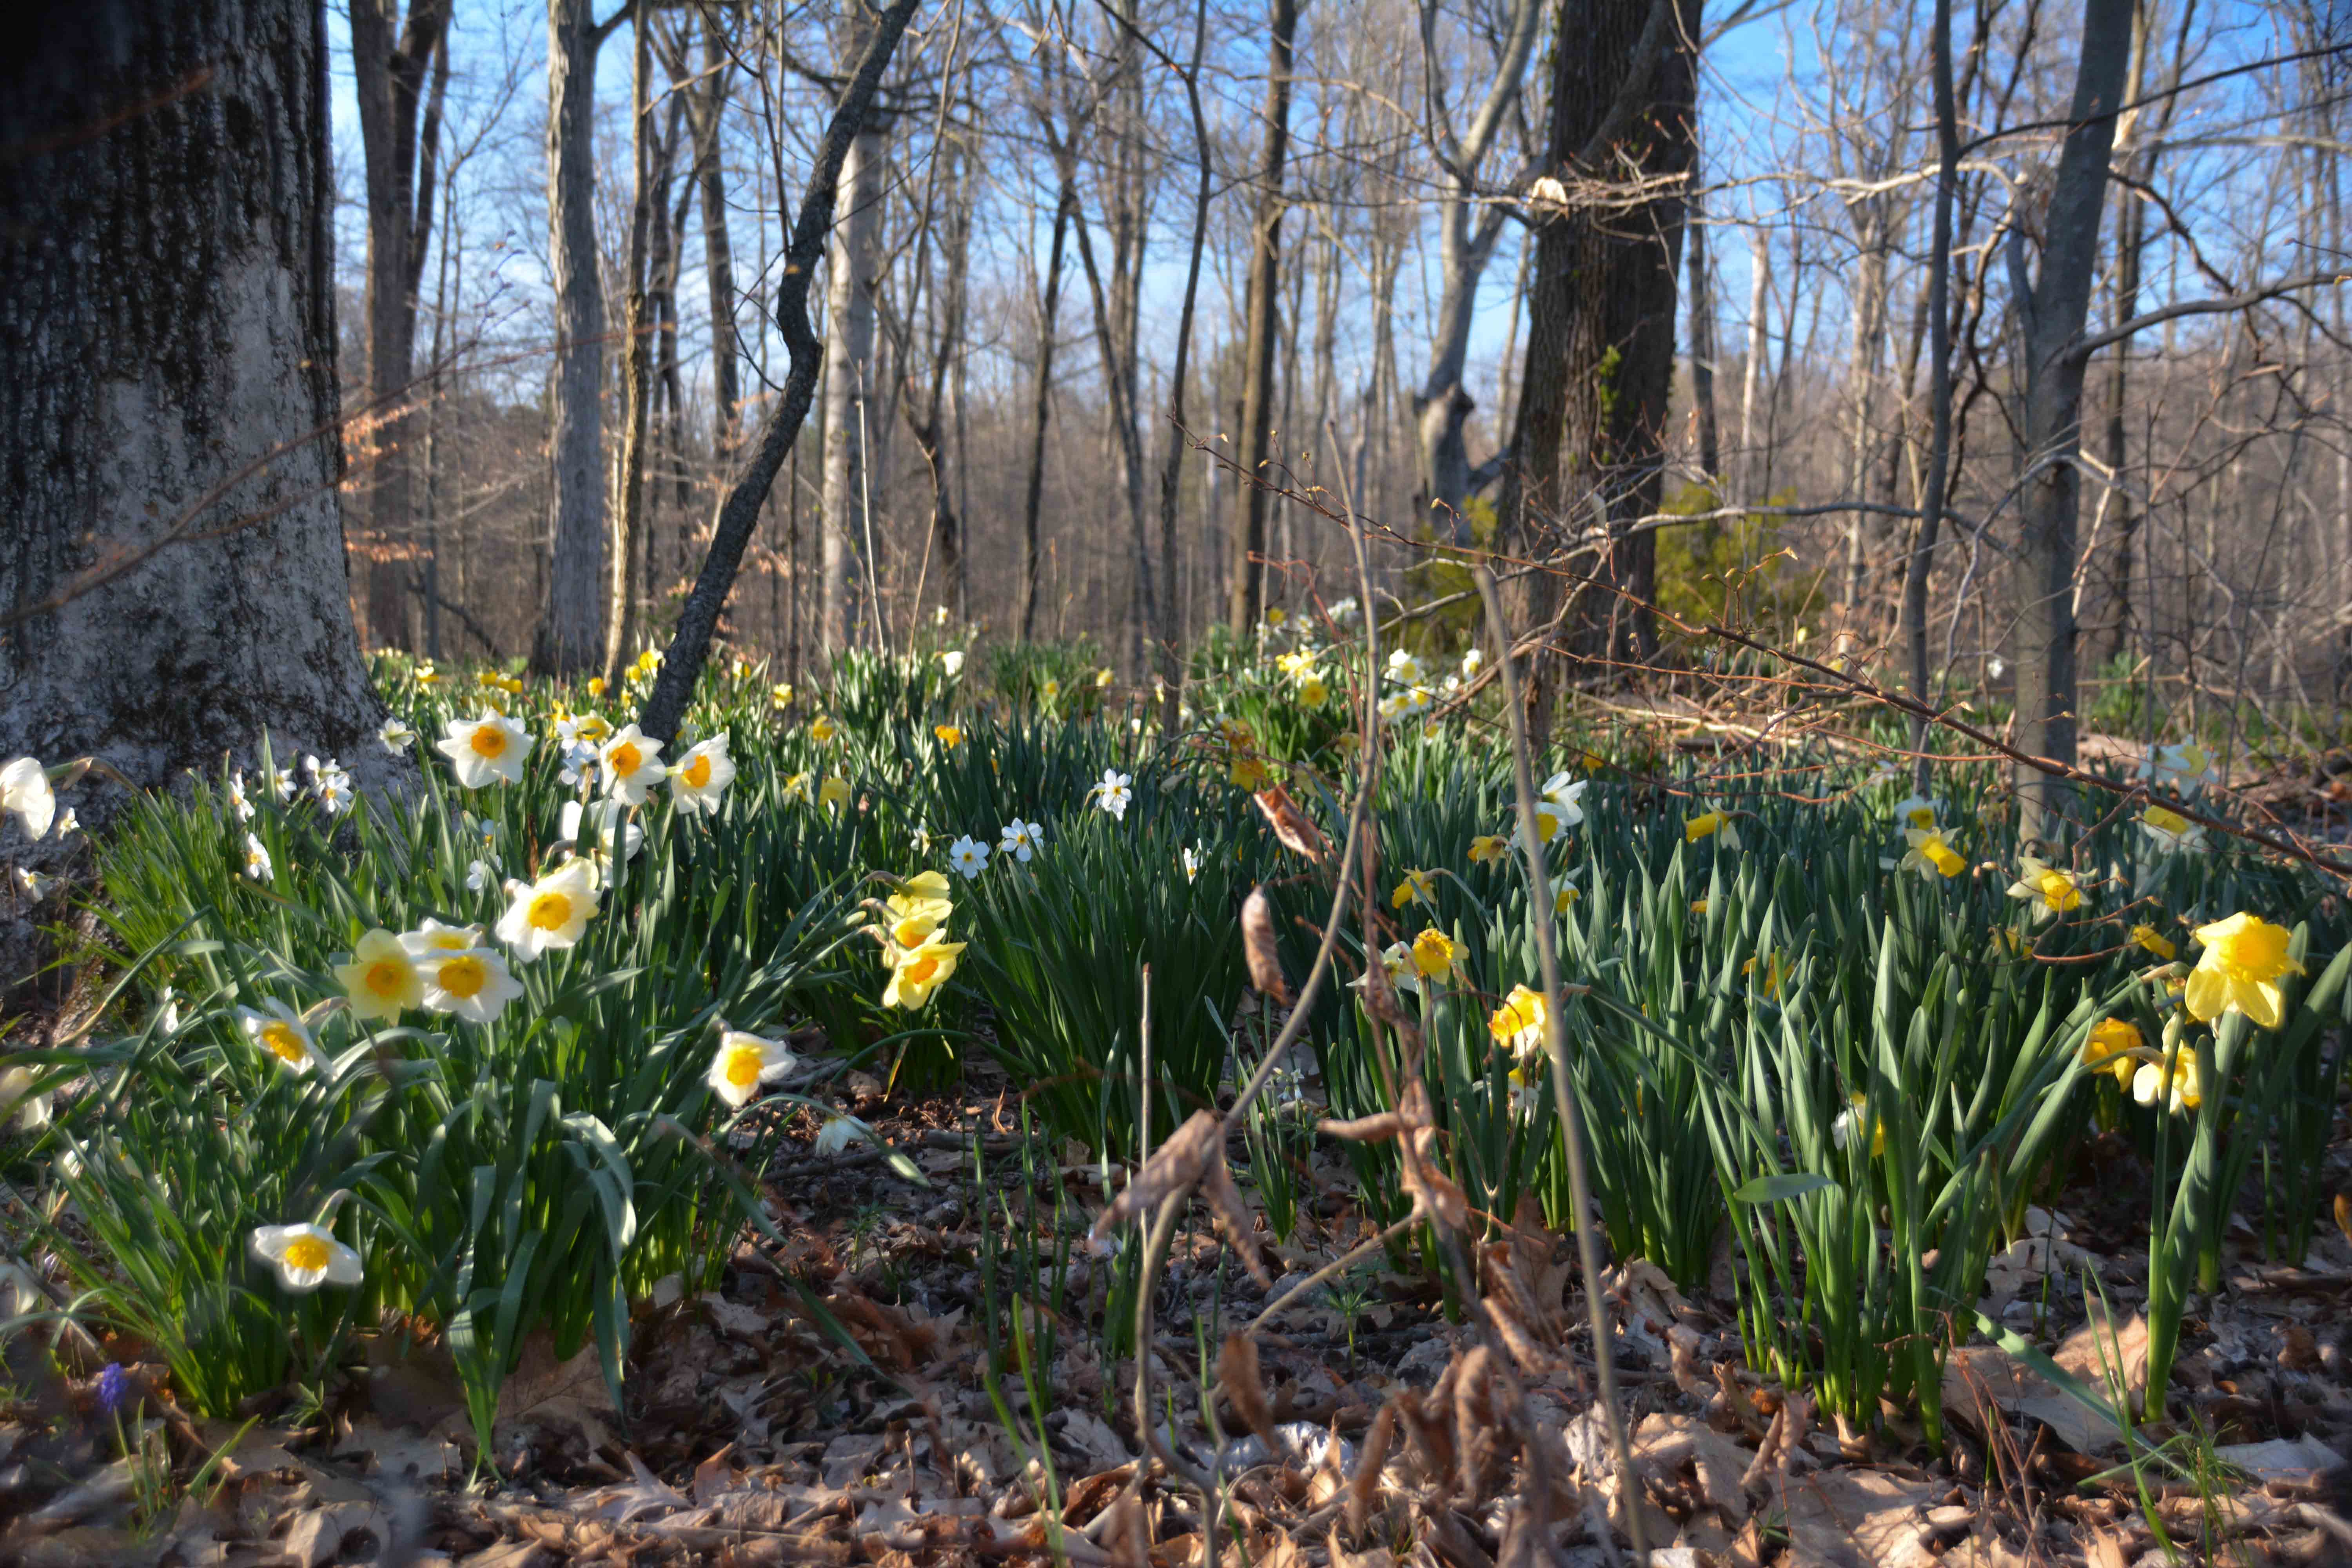 images above feature multiple groupings of naturalized daffodils in a woodland setting. These bulbs have been planted for 20 plus years and have spread in sporadic clumps with multiple varieties nesting together. As these daffodils foliage beings to die back, the other ground covers take over.  More at Thinkingoutsidetheboxwood.com